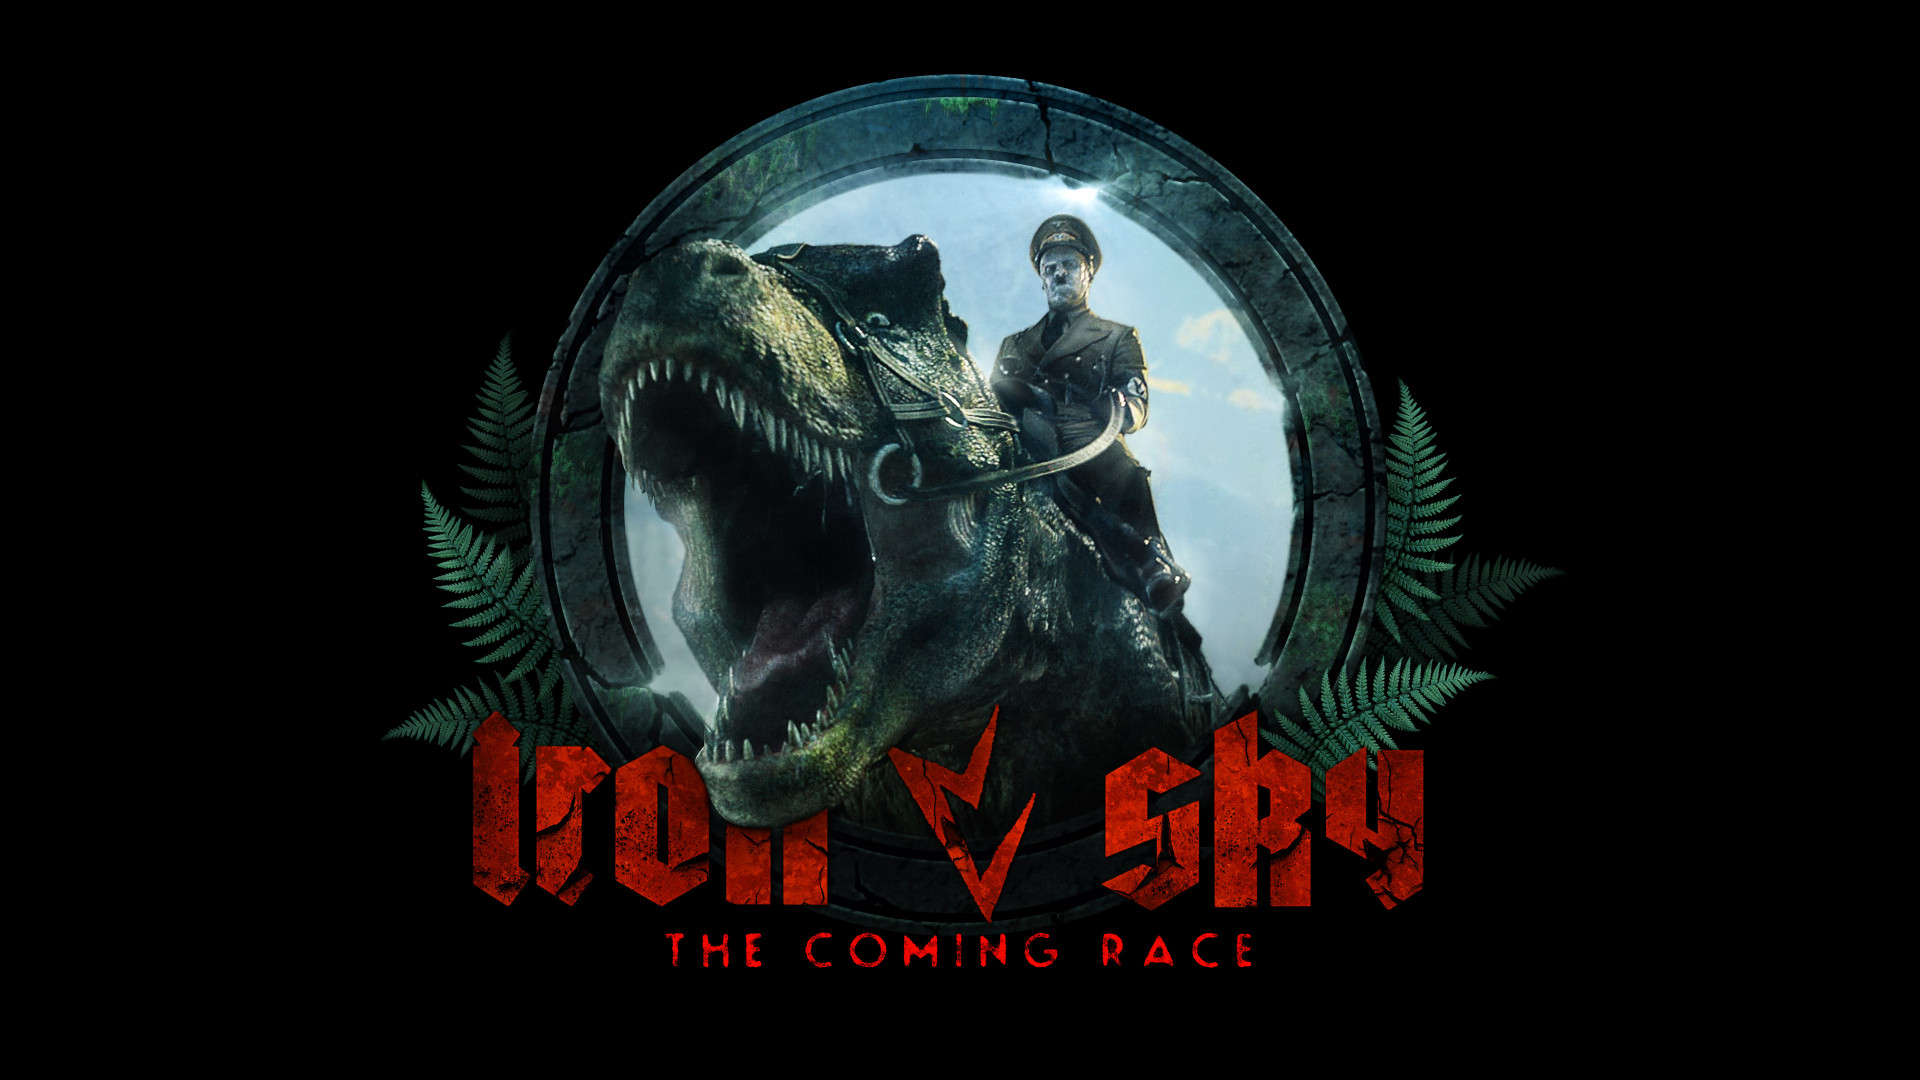 Wallpaper Iron Sky: The Coming Race, poster, 4k, Movies #159911920 x 1080